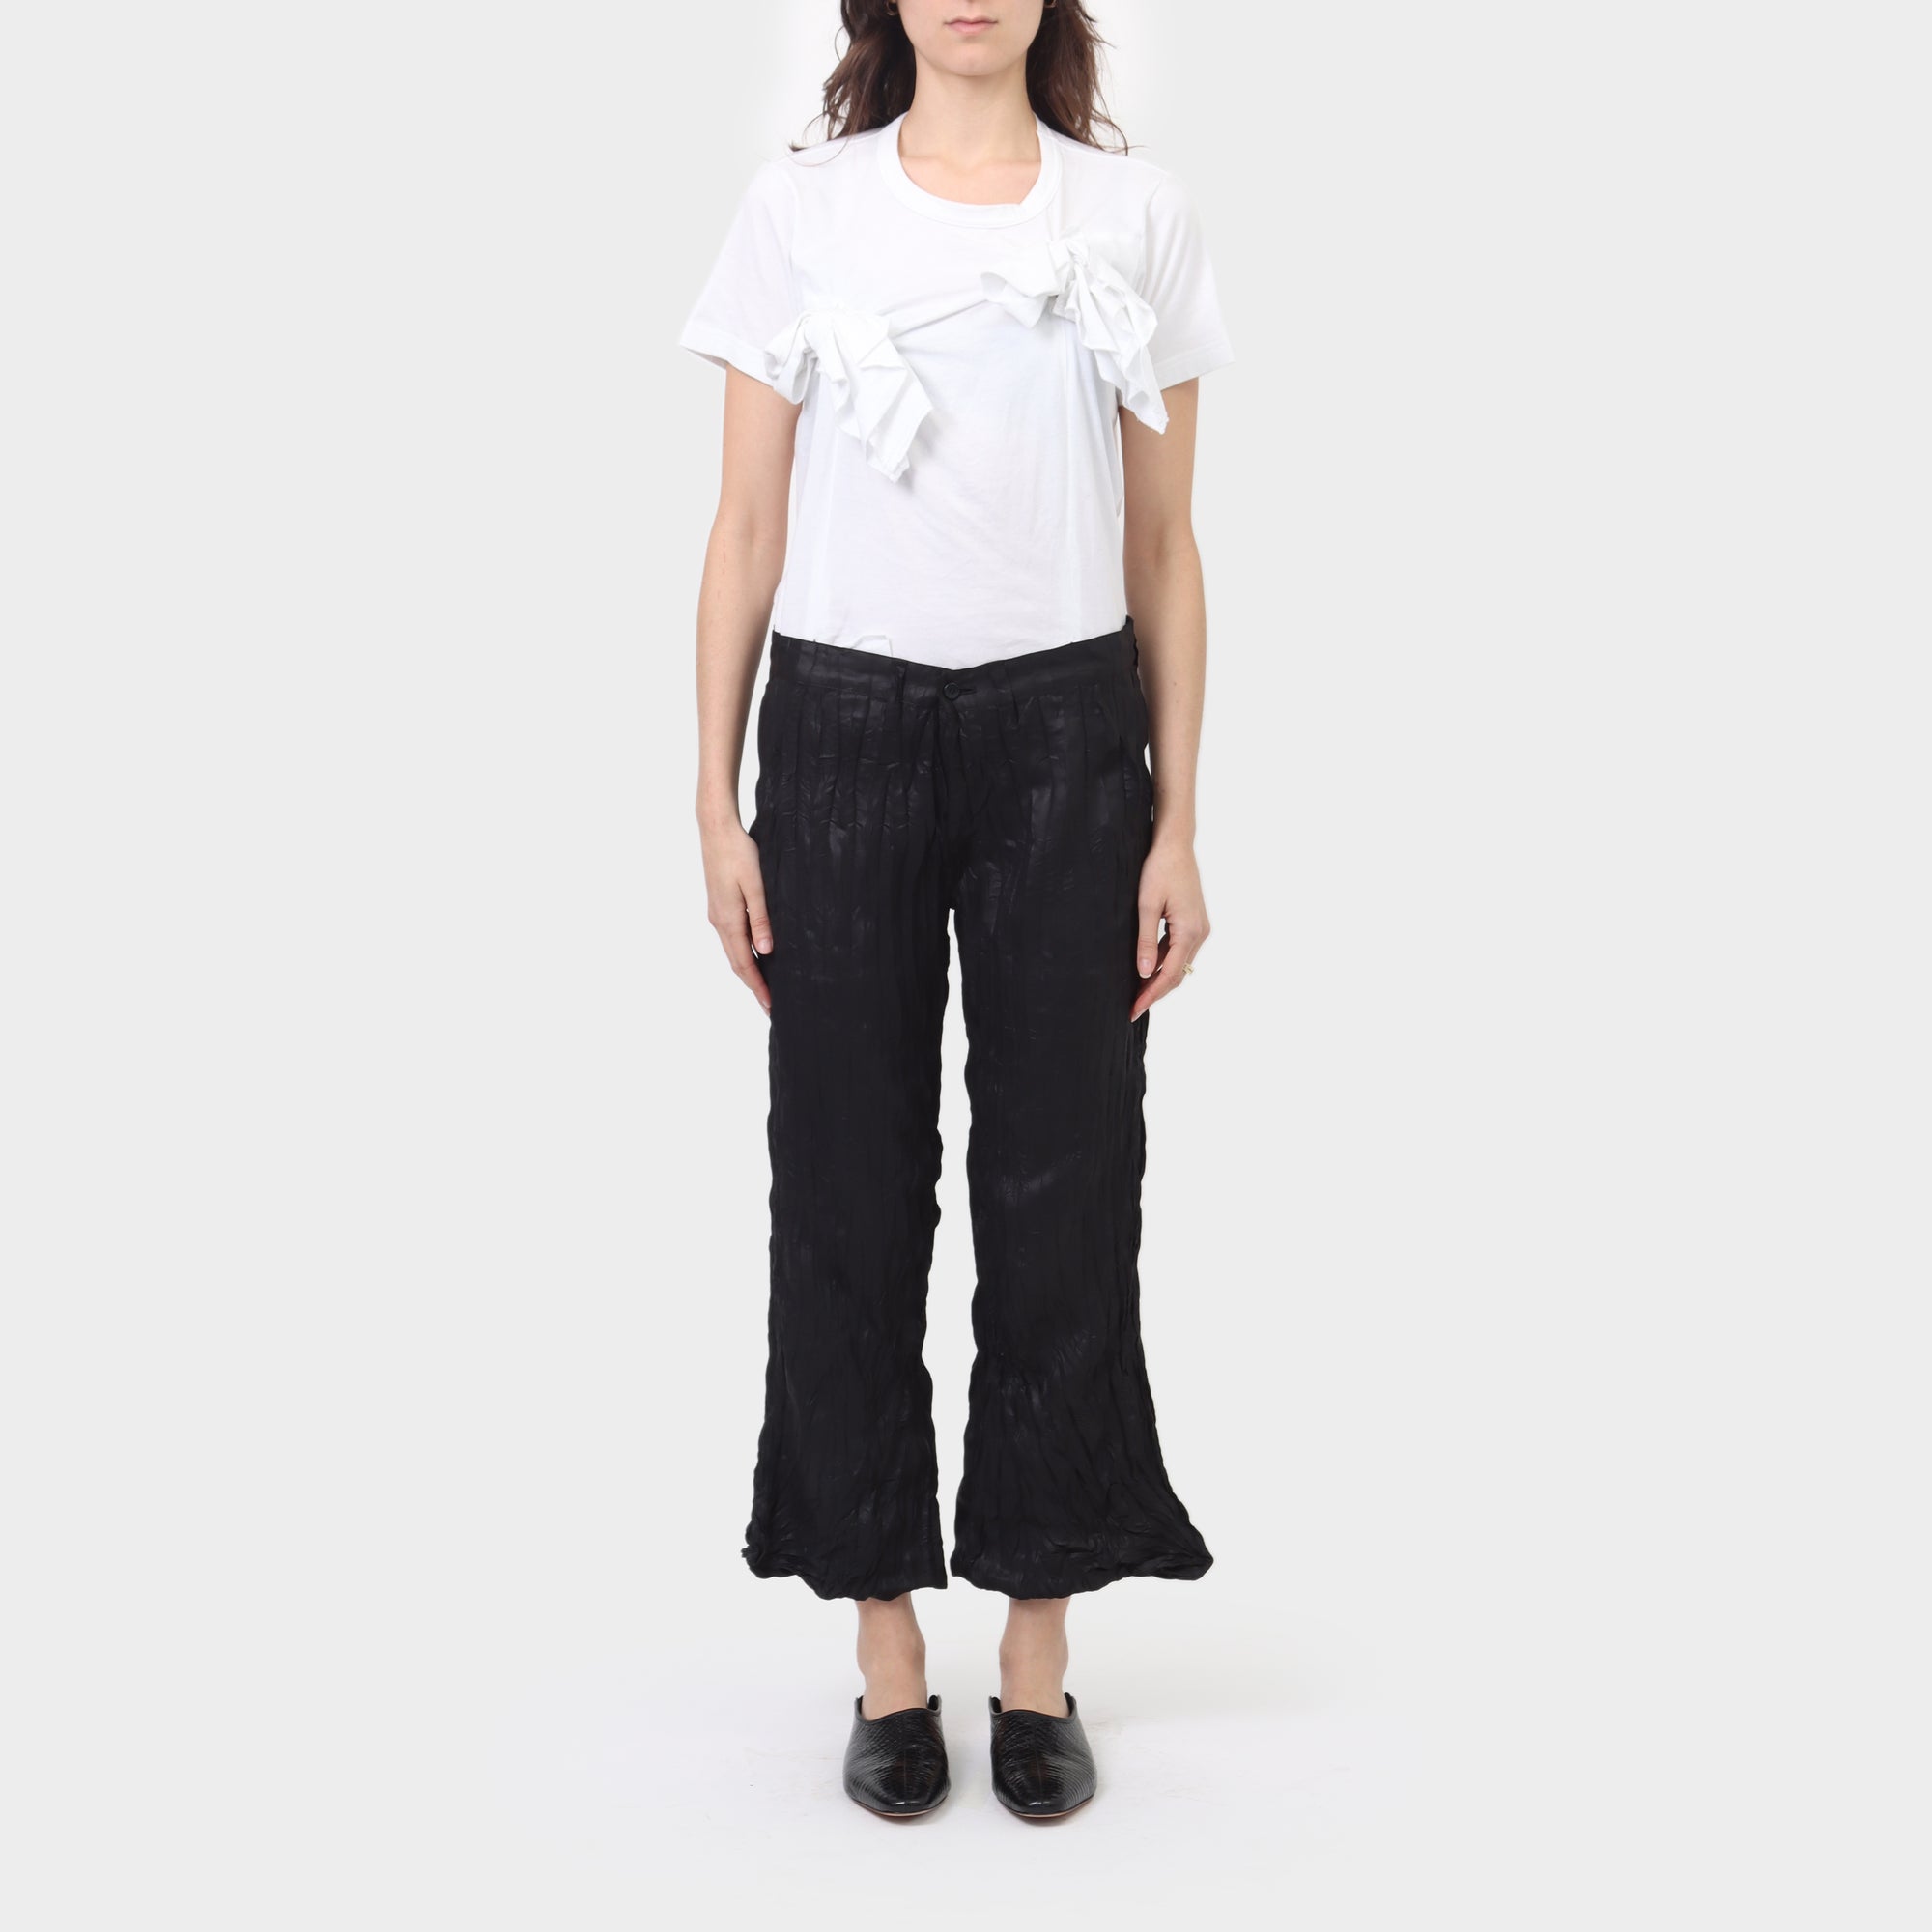 Issey Miyake Fete Crushed Pleat Pants